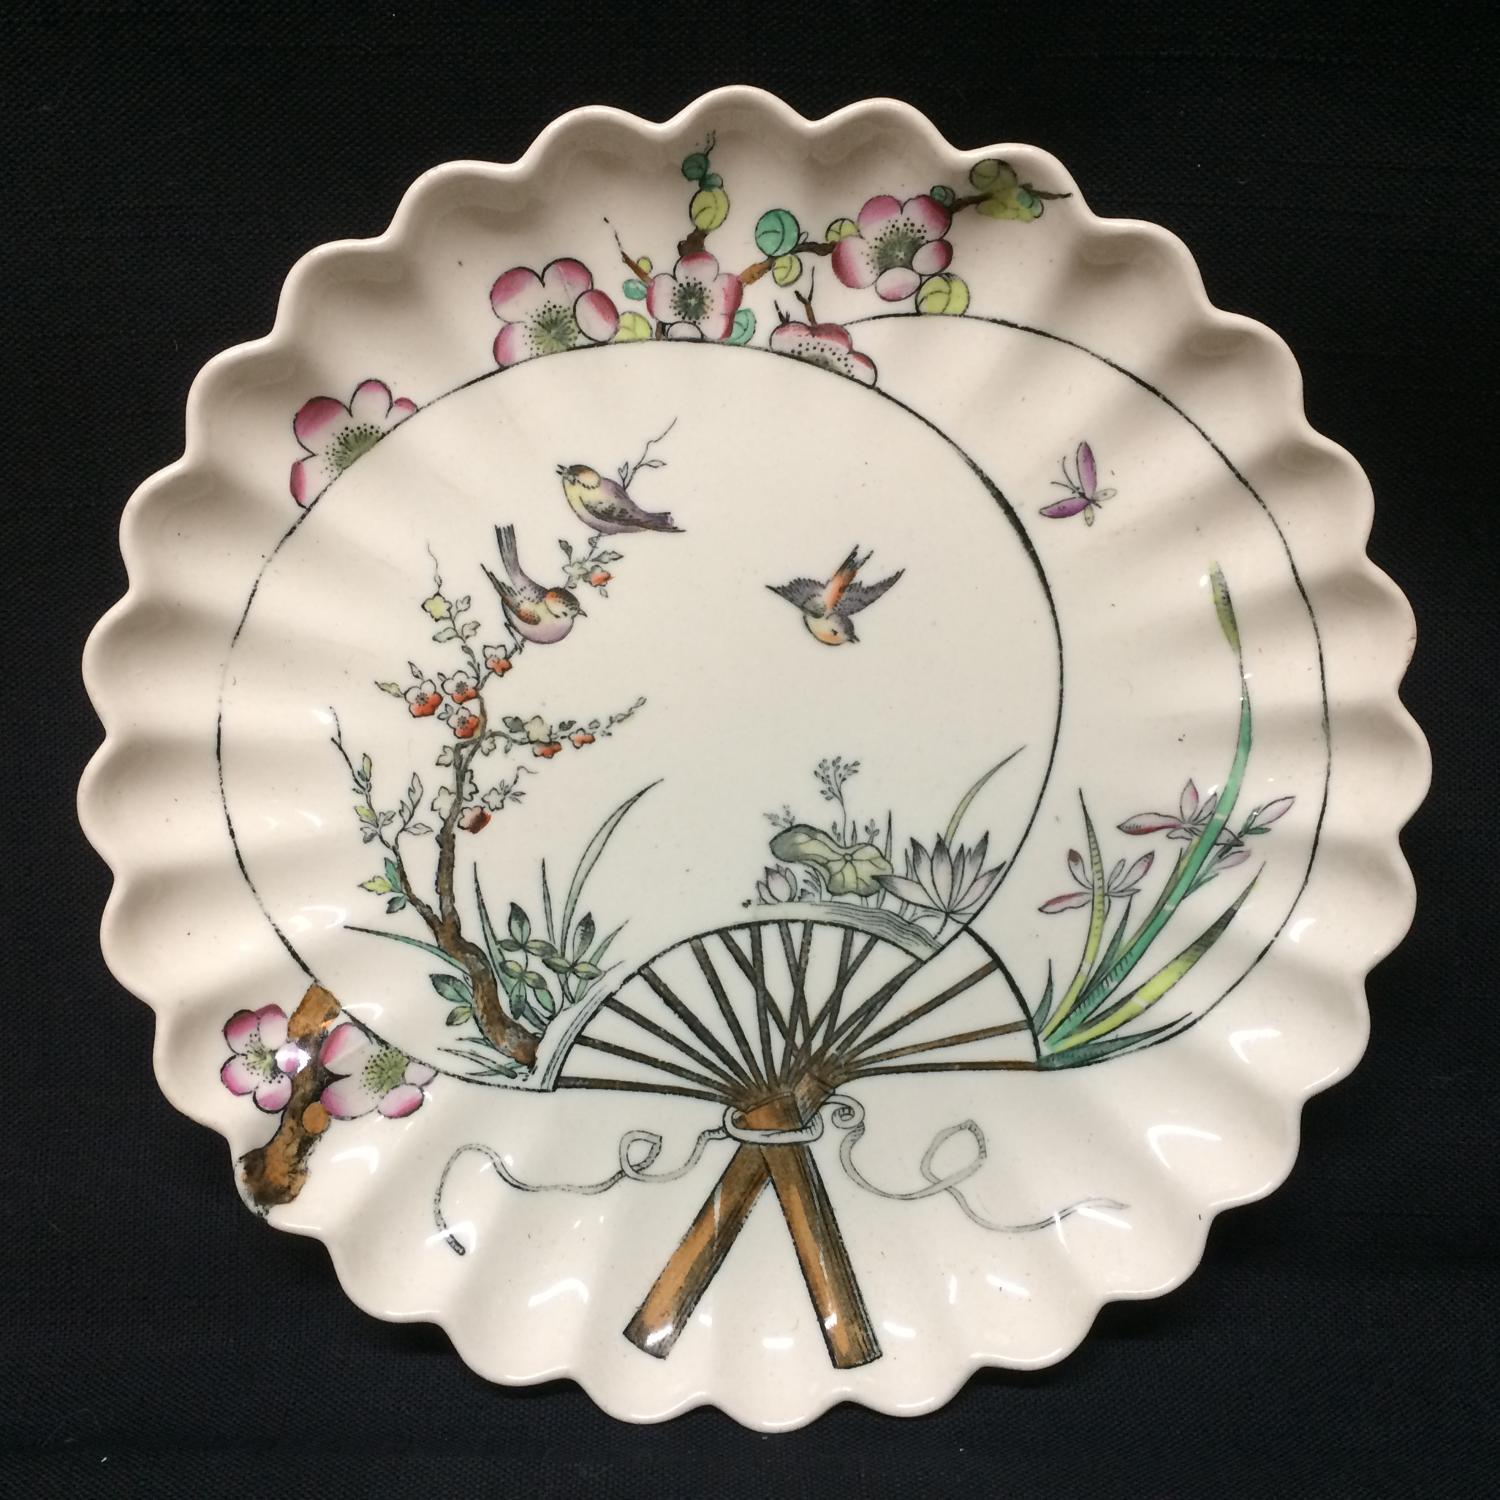 1877 Victorian Aesthetic Movement Plate ~ Butterfly and Birds 1877